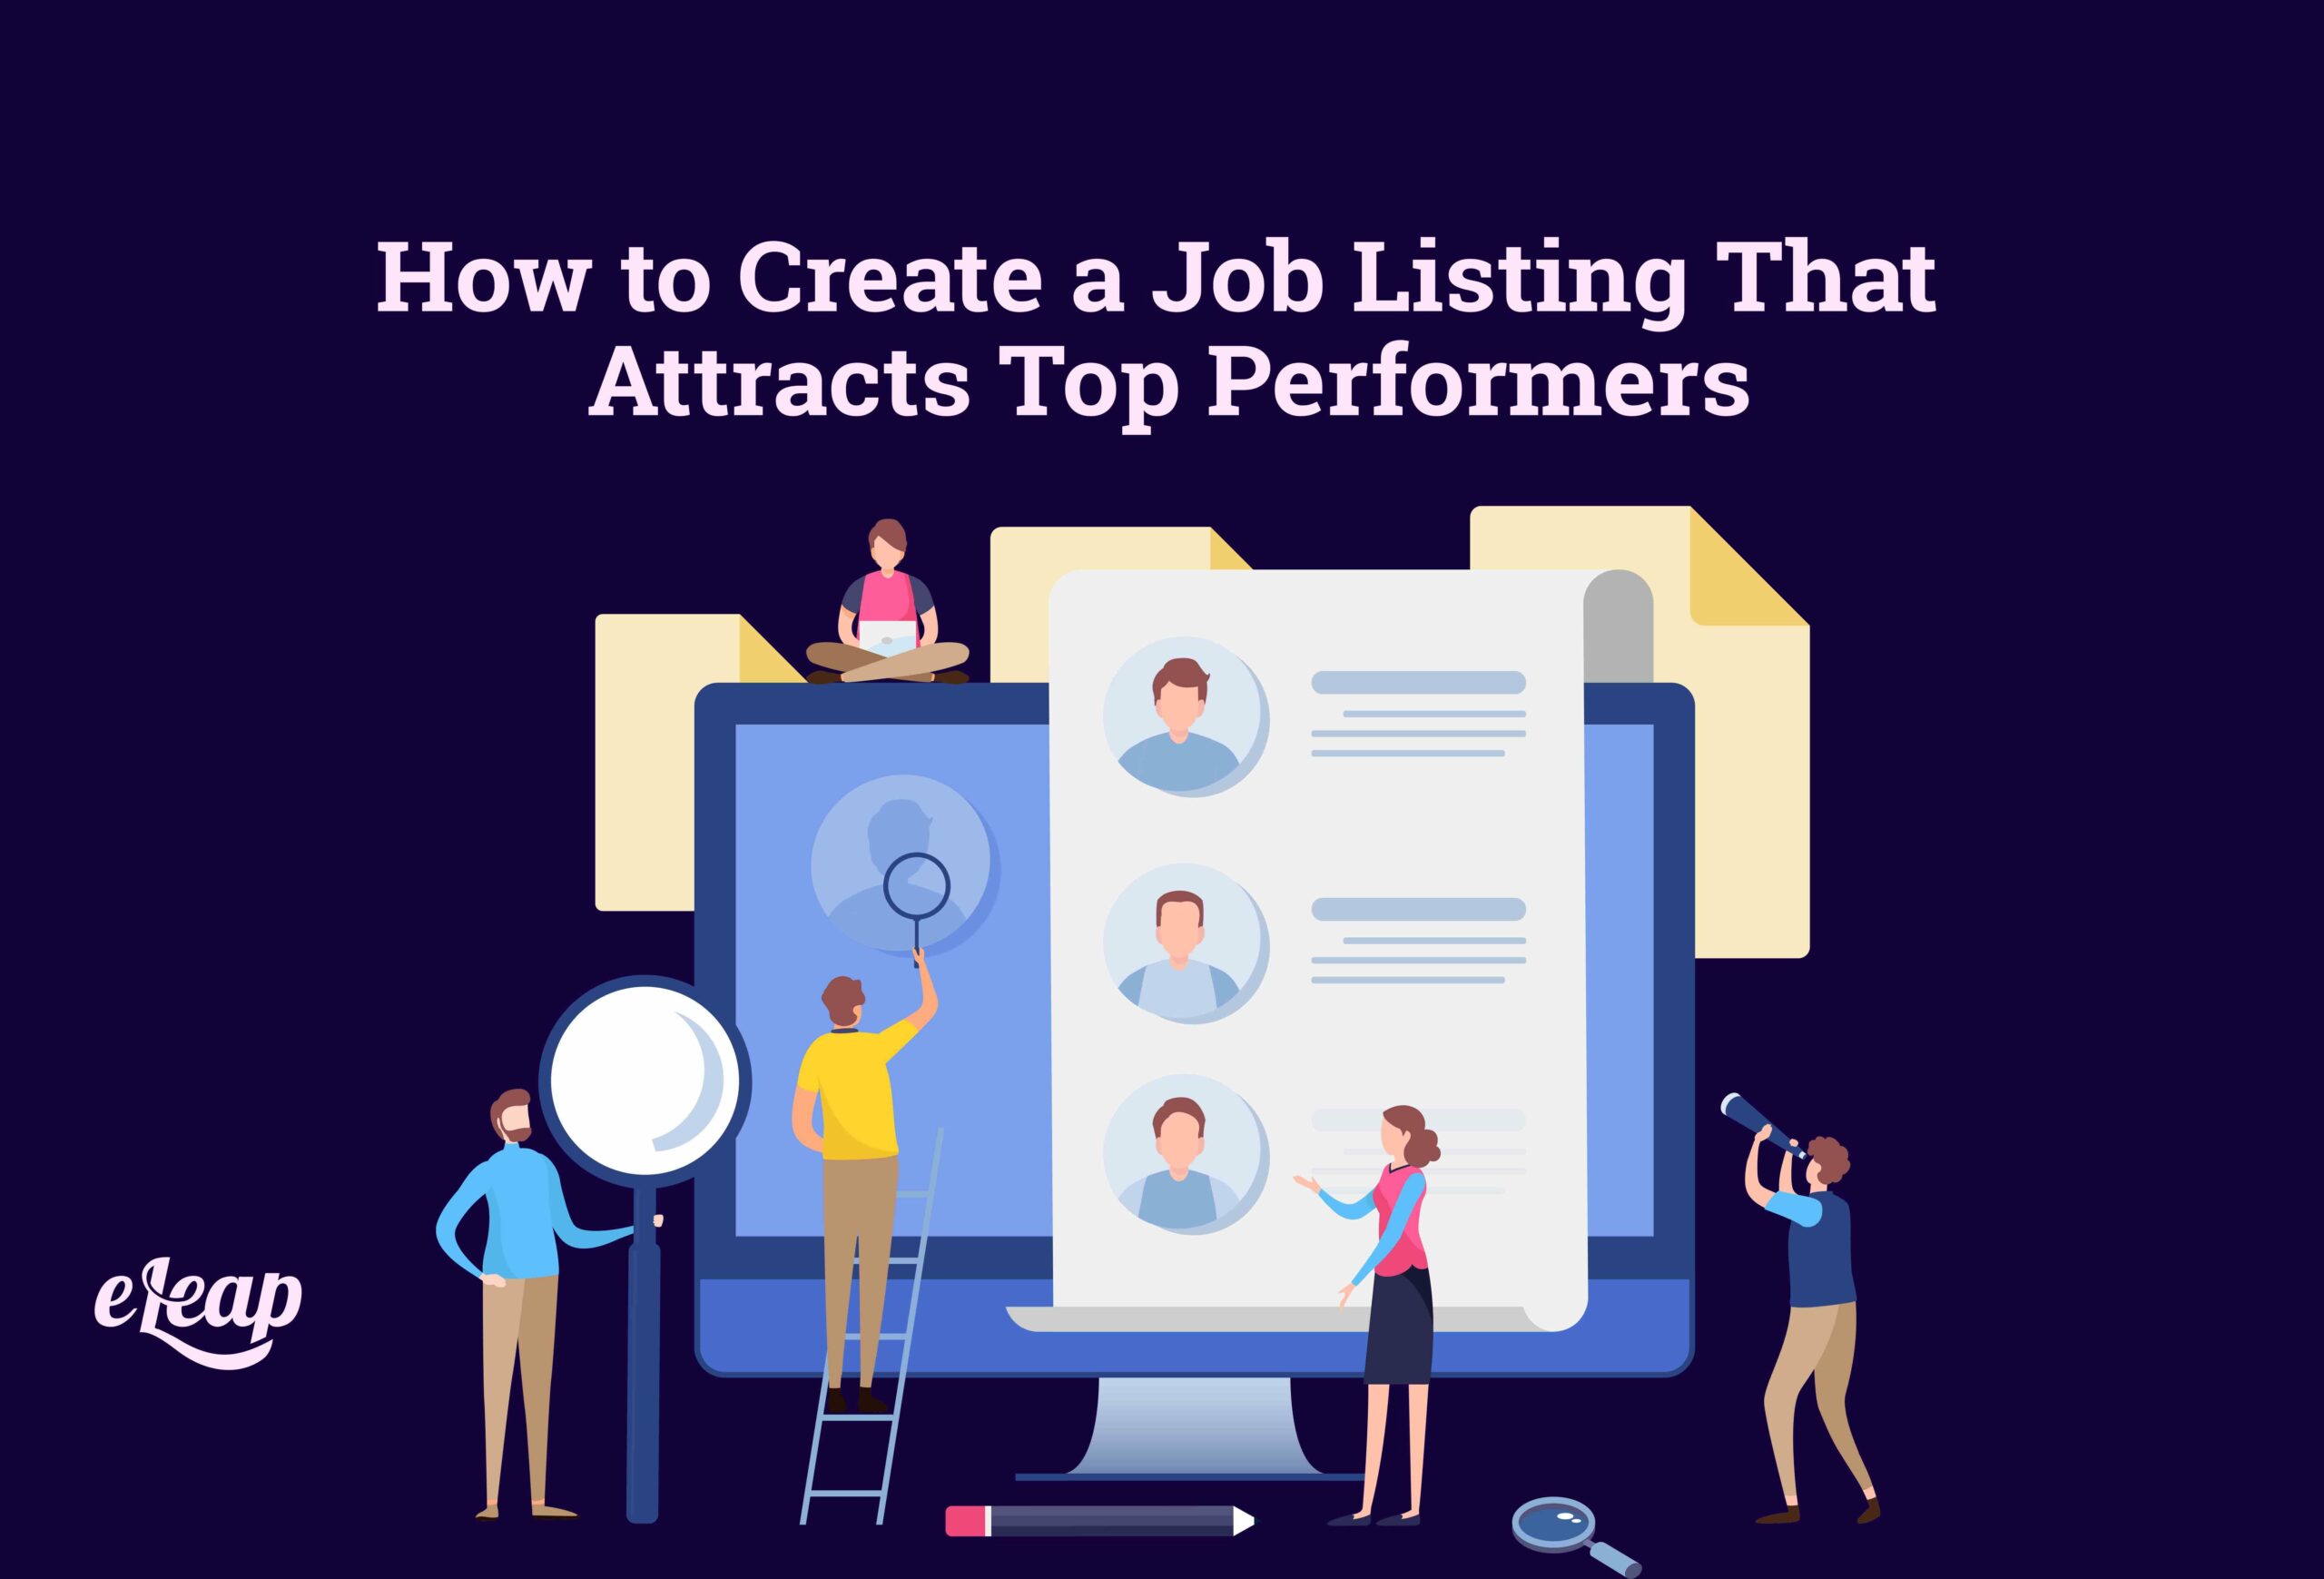 How to Create a Job Listing That Attracts Top Performers